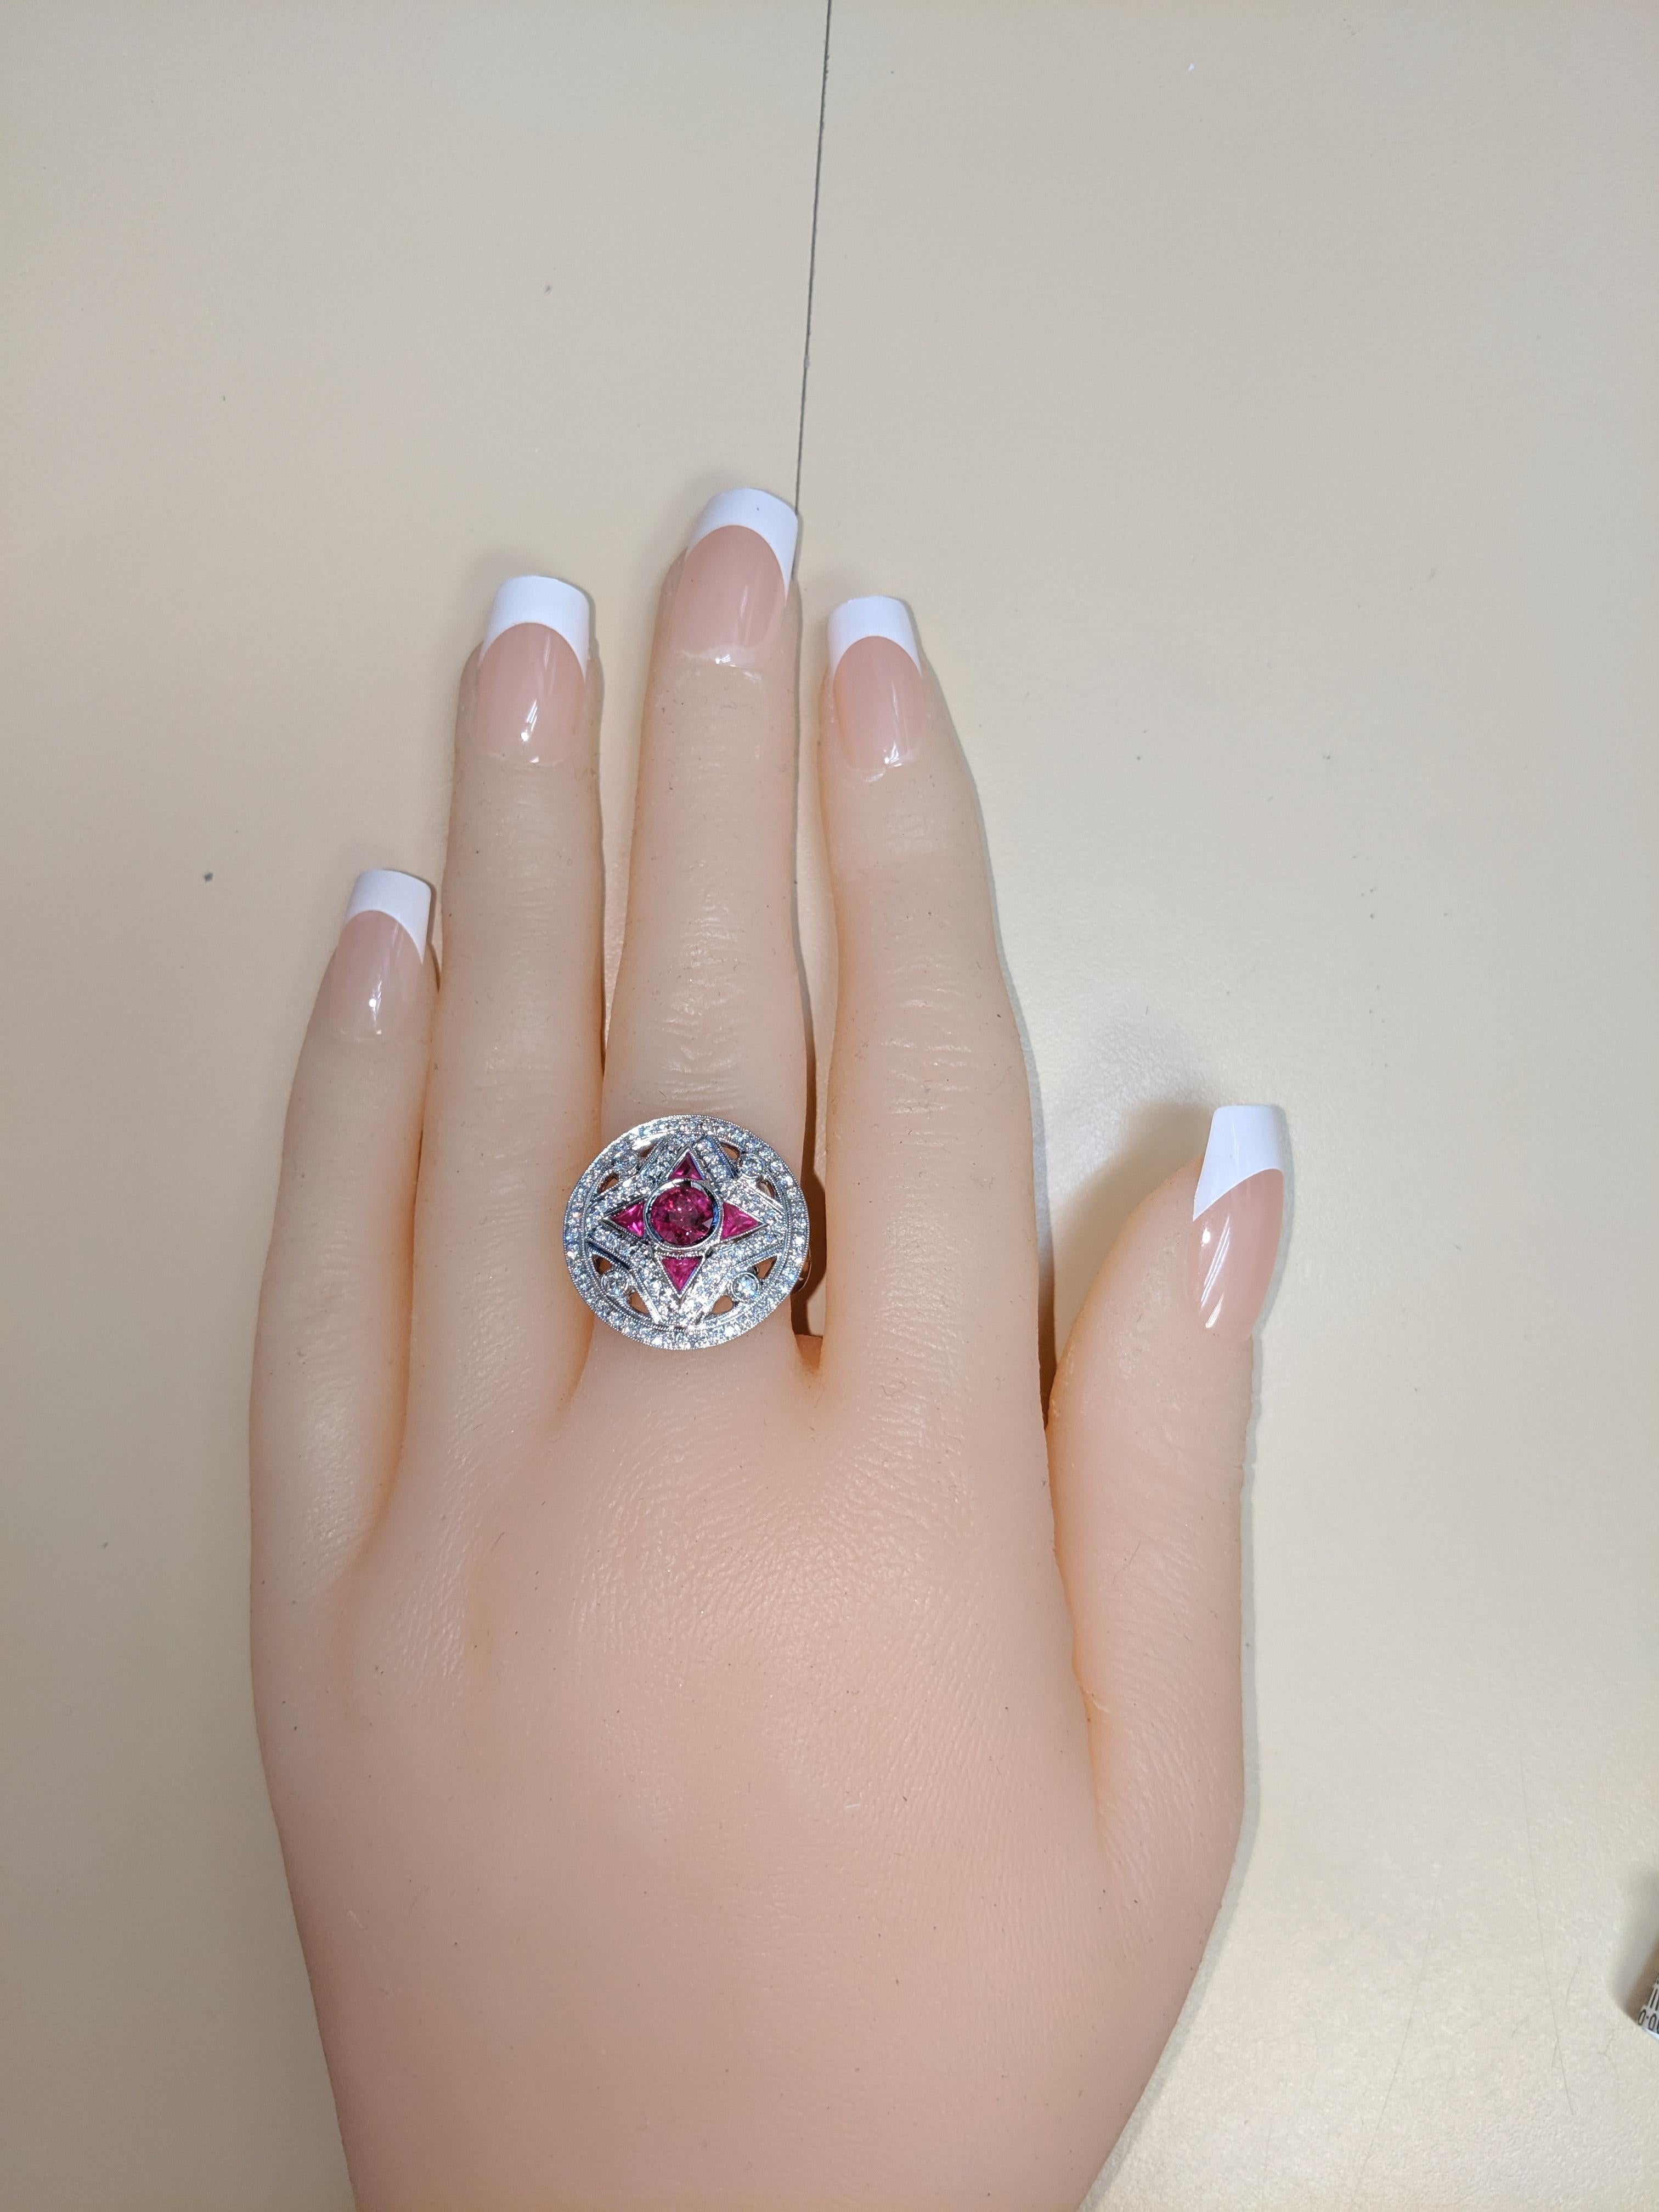 Ruby and Diamond Fashion/Cocktail Ring in 18 Karat White Gold In New Condition For Sale In Lake Havasu City, AZ